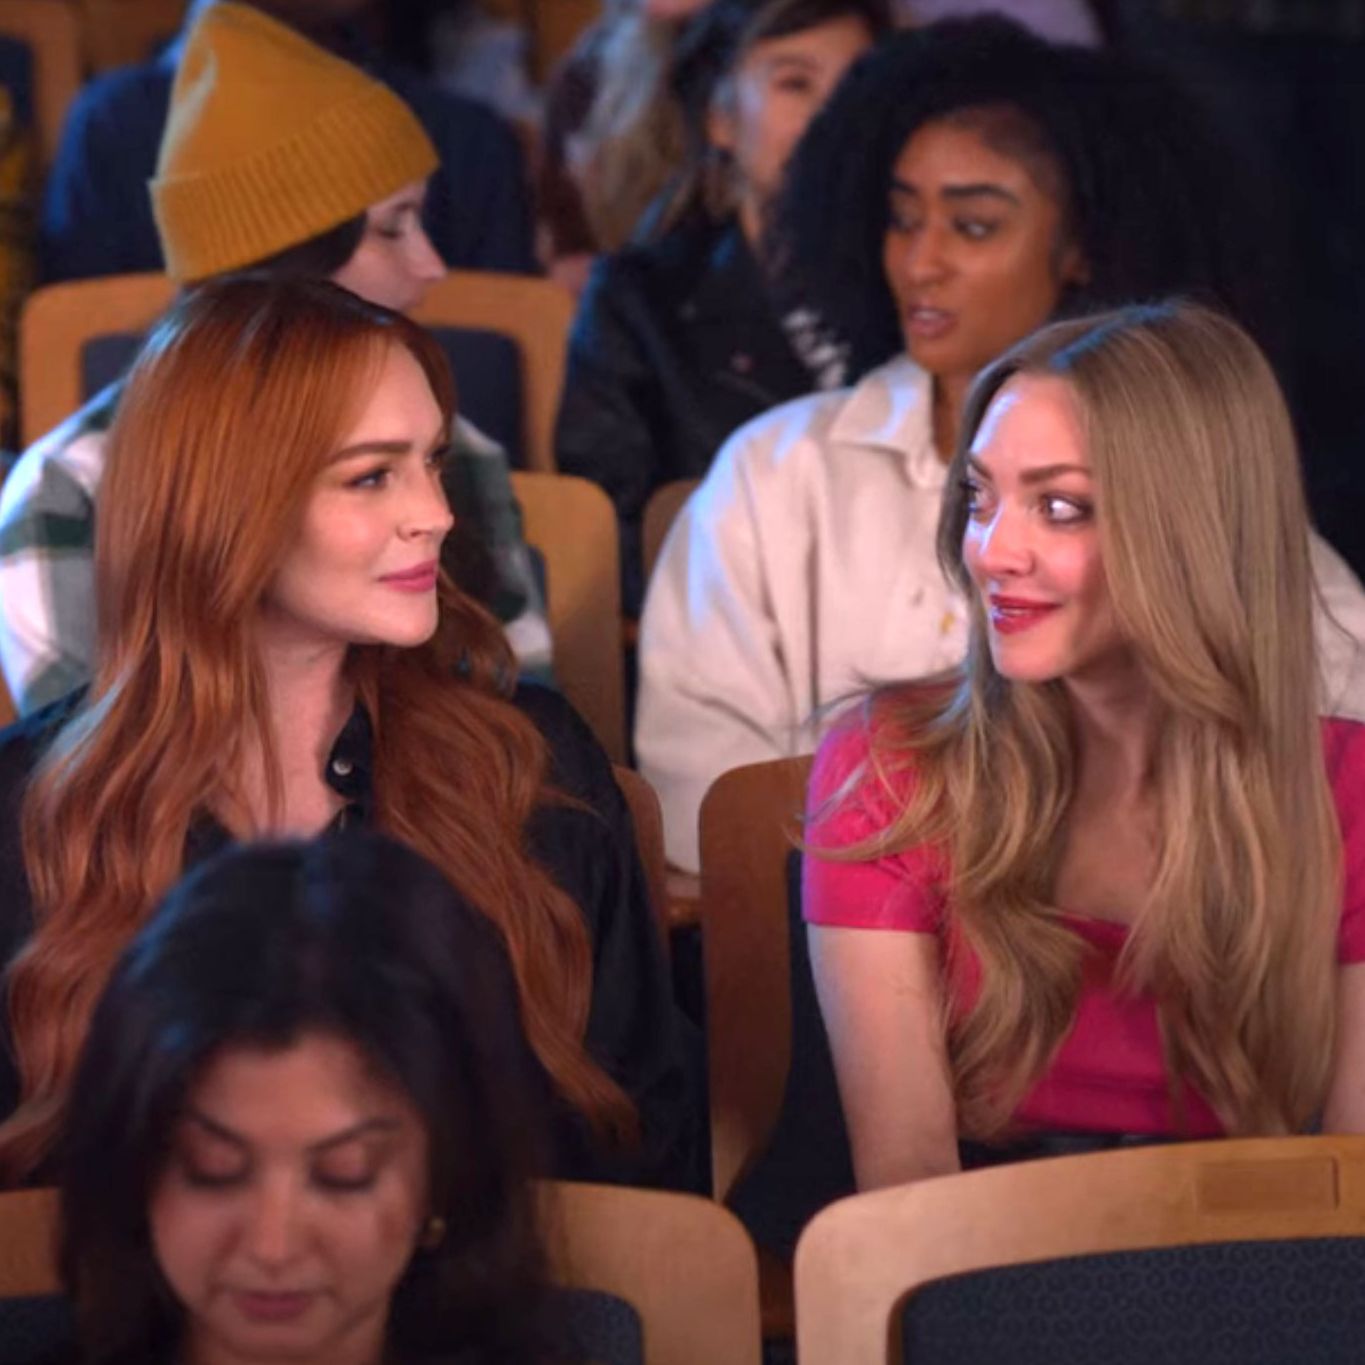 Watch Lindsay Lohan, Amanda Seyfried, and Lacey Chabert Reprise Their 'Mean Girls' Roles